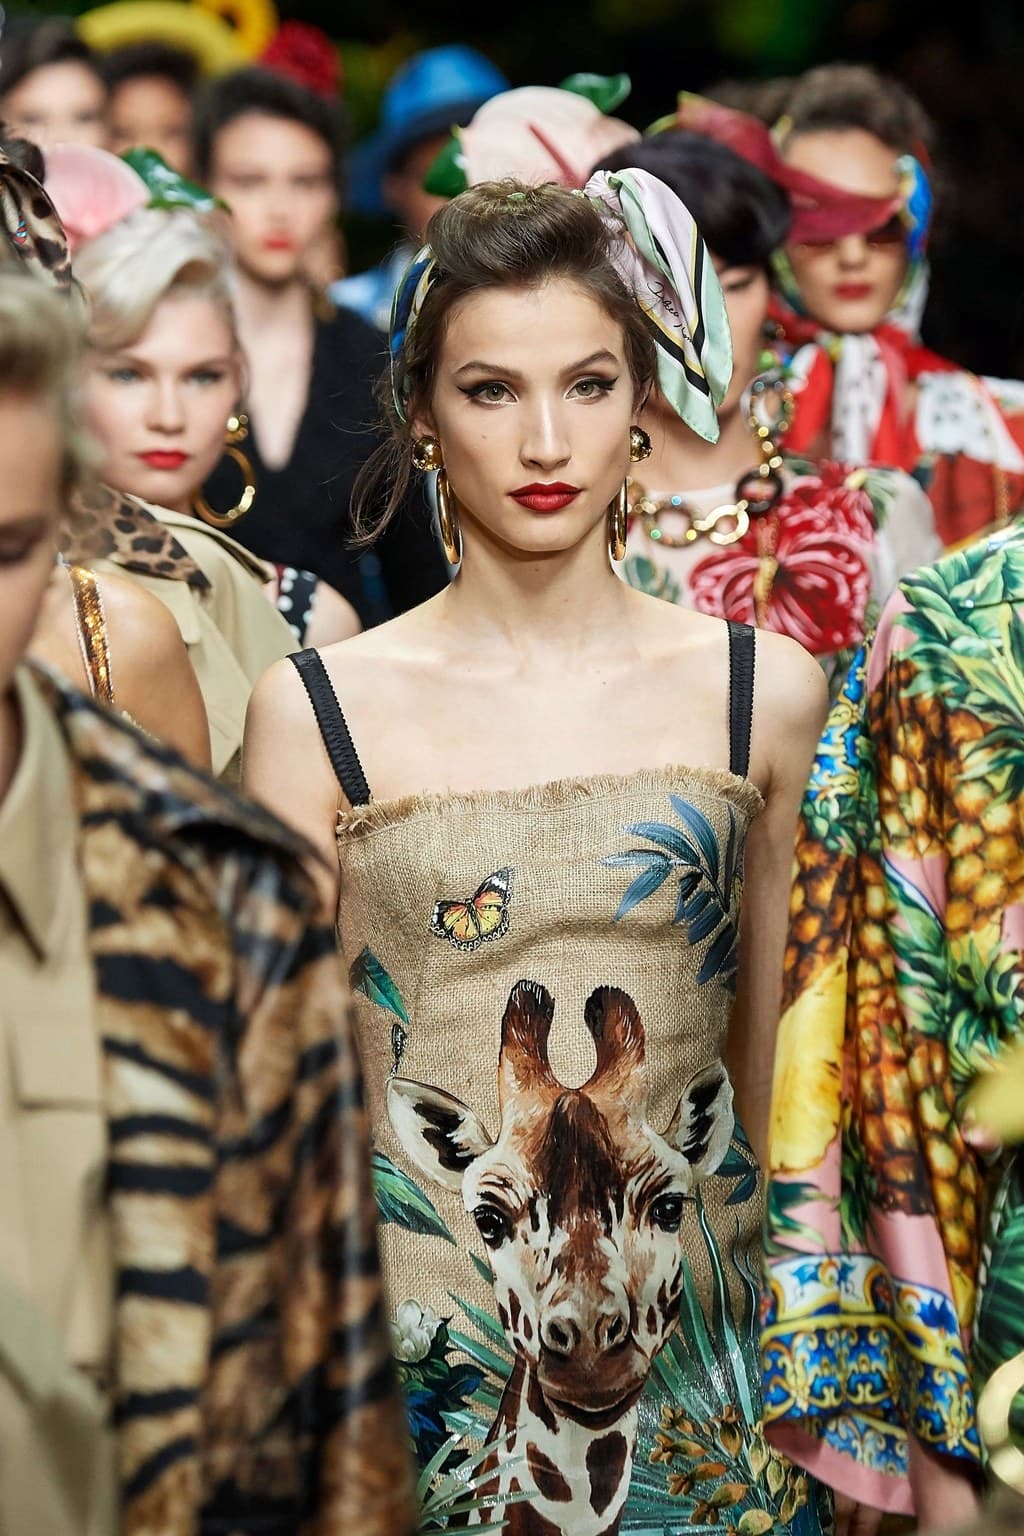 MFW: Top 10 Looks From Dolce & Gabbana's Spring/Summer 2020 Show